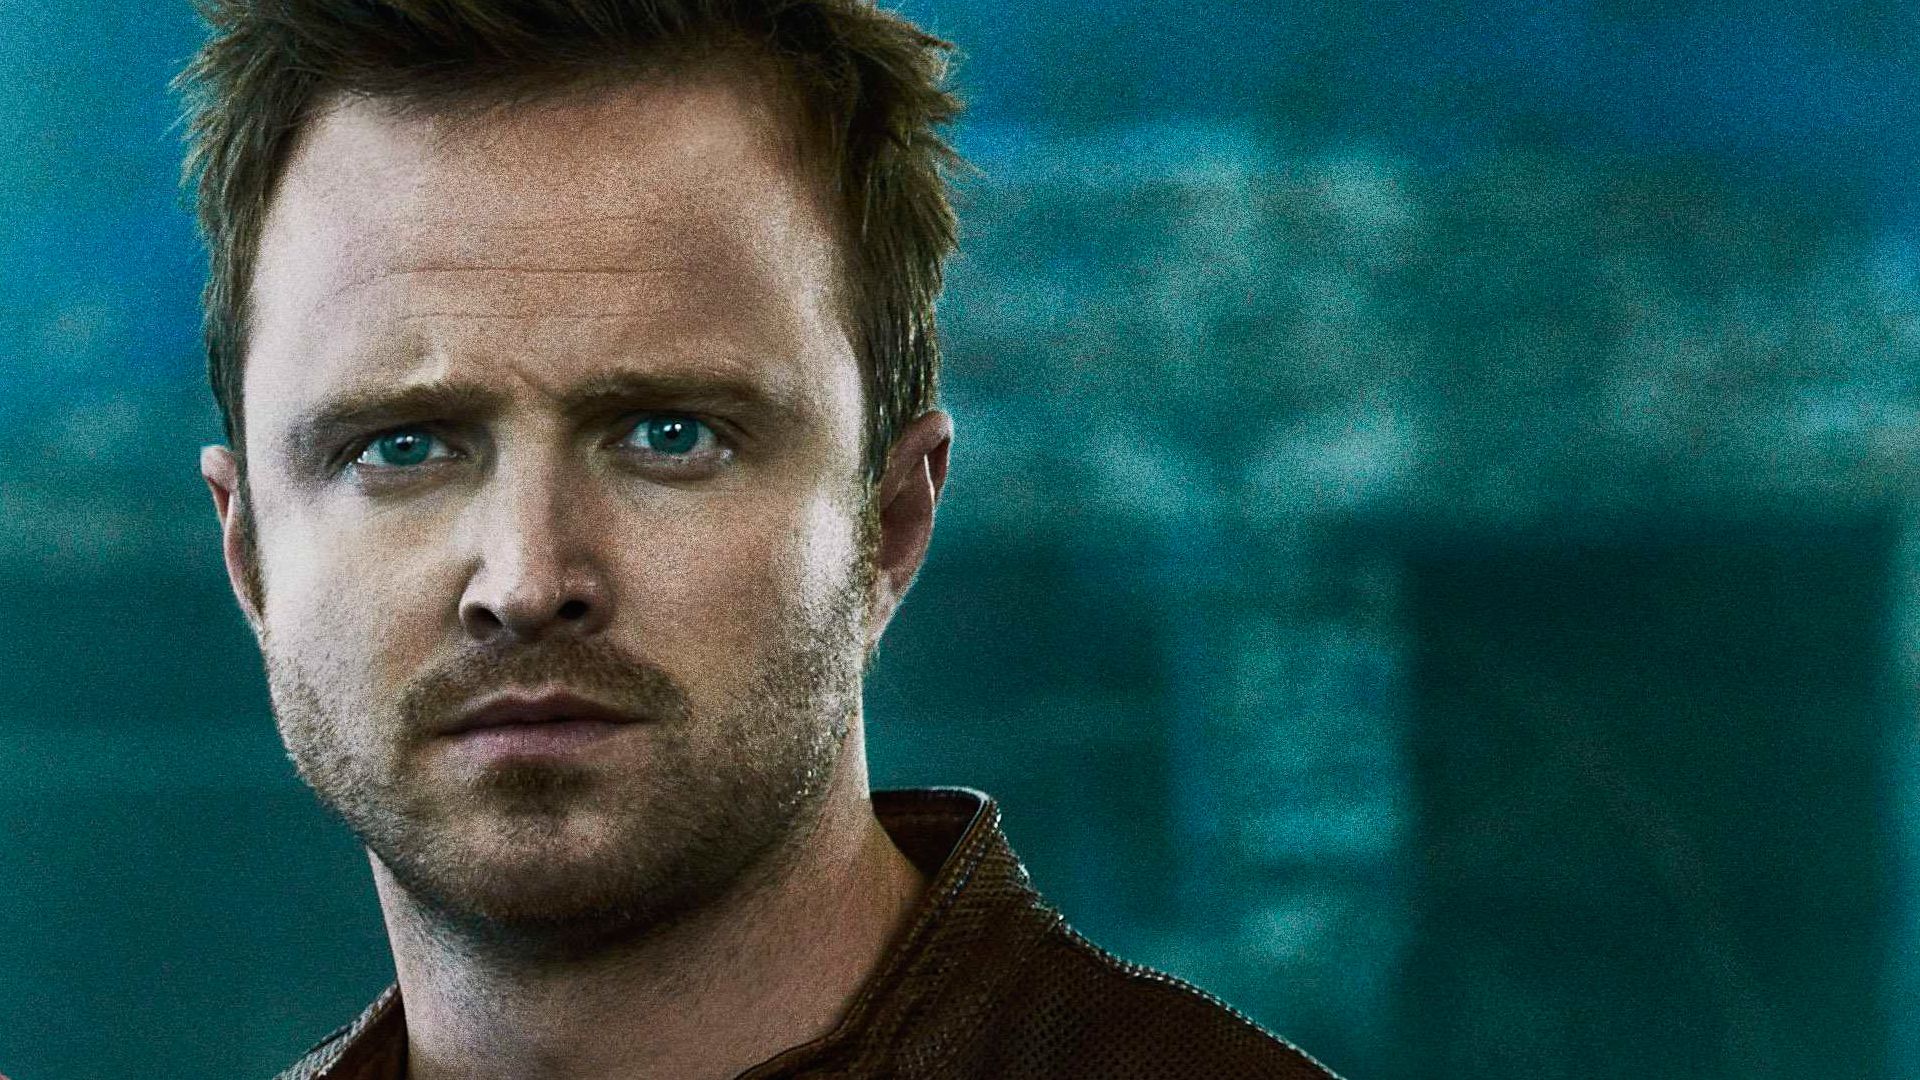 Download 1920x1080 HD Wallpaper aaron paul face main character need for speed, Desktop Background HD